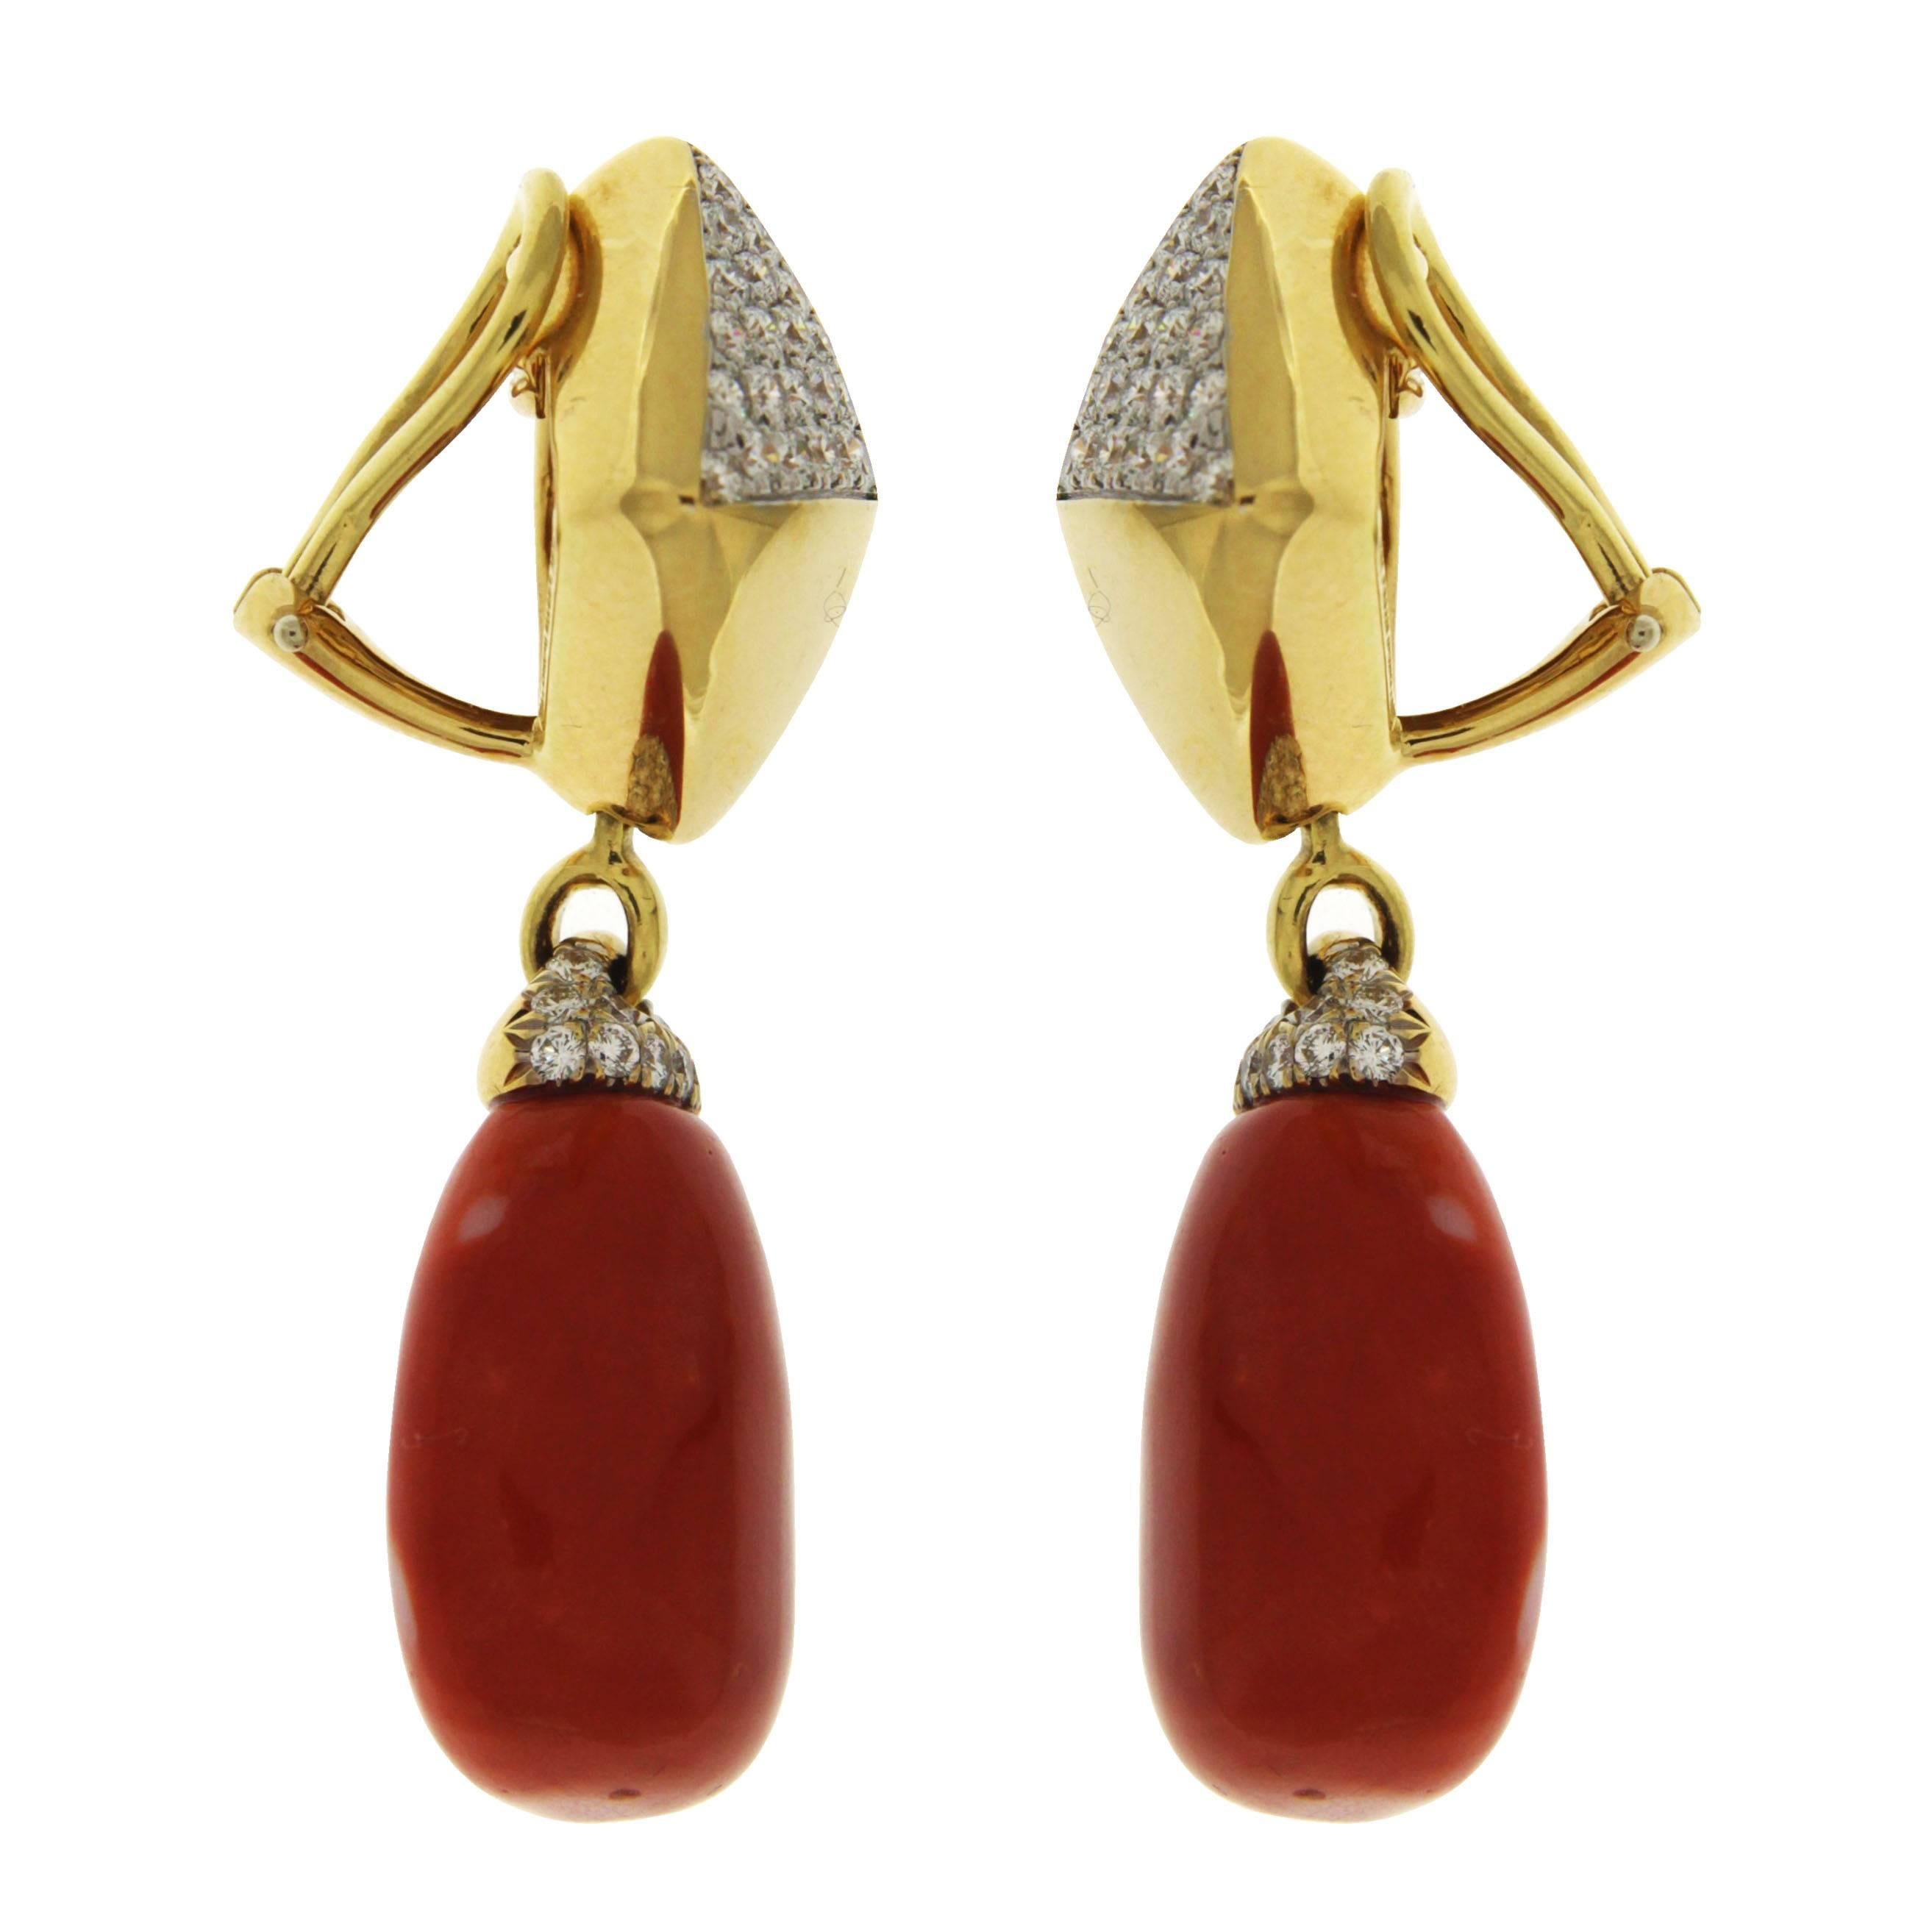 This pair of unique earrings is designed with Pyramid pave and removable  drop of Sardinian Coral Earrings. The earrings are finished in 18kt yellow gold and clips.
